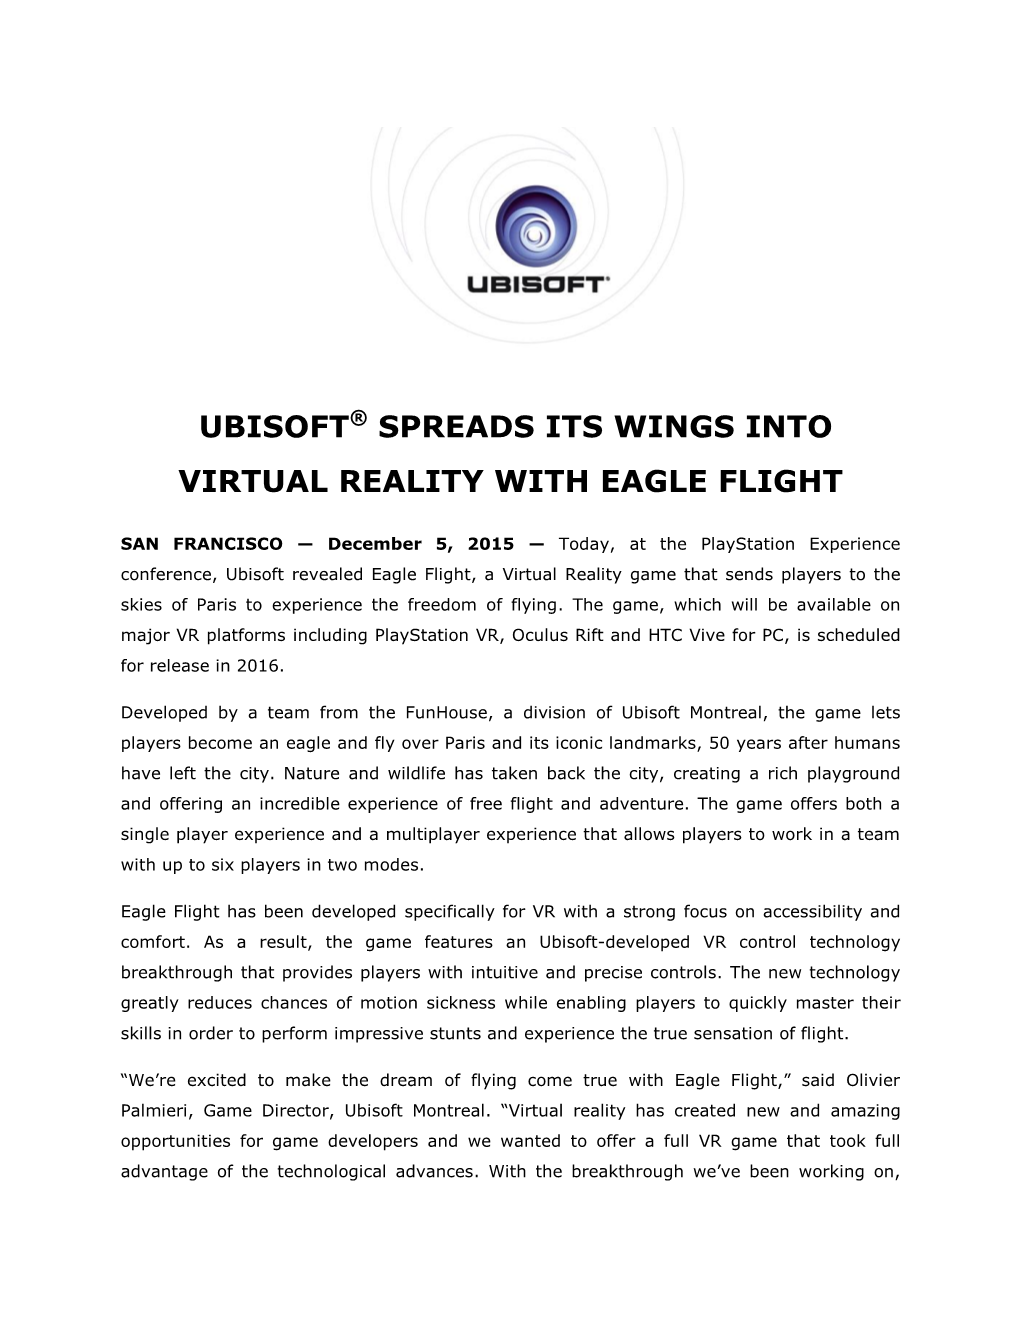 Ubisoft® Spreads Its Wings Into Virtual Reality with Eagle Flight